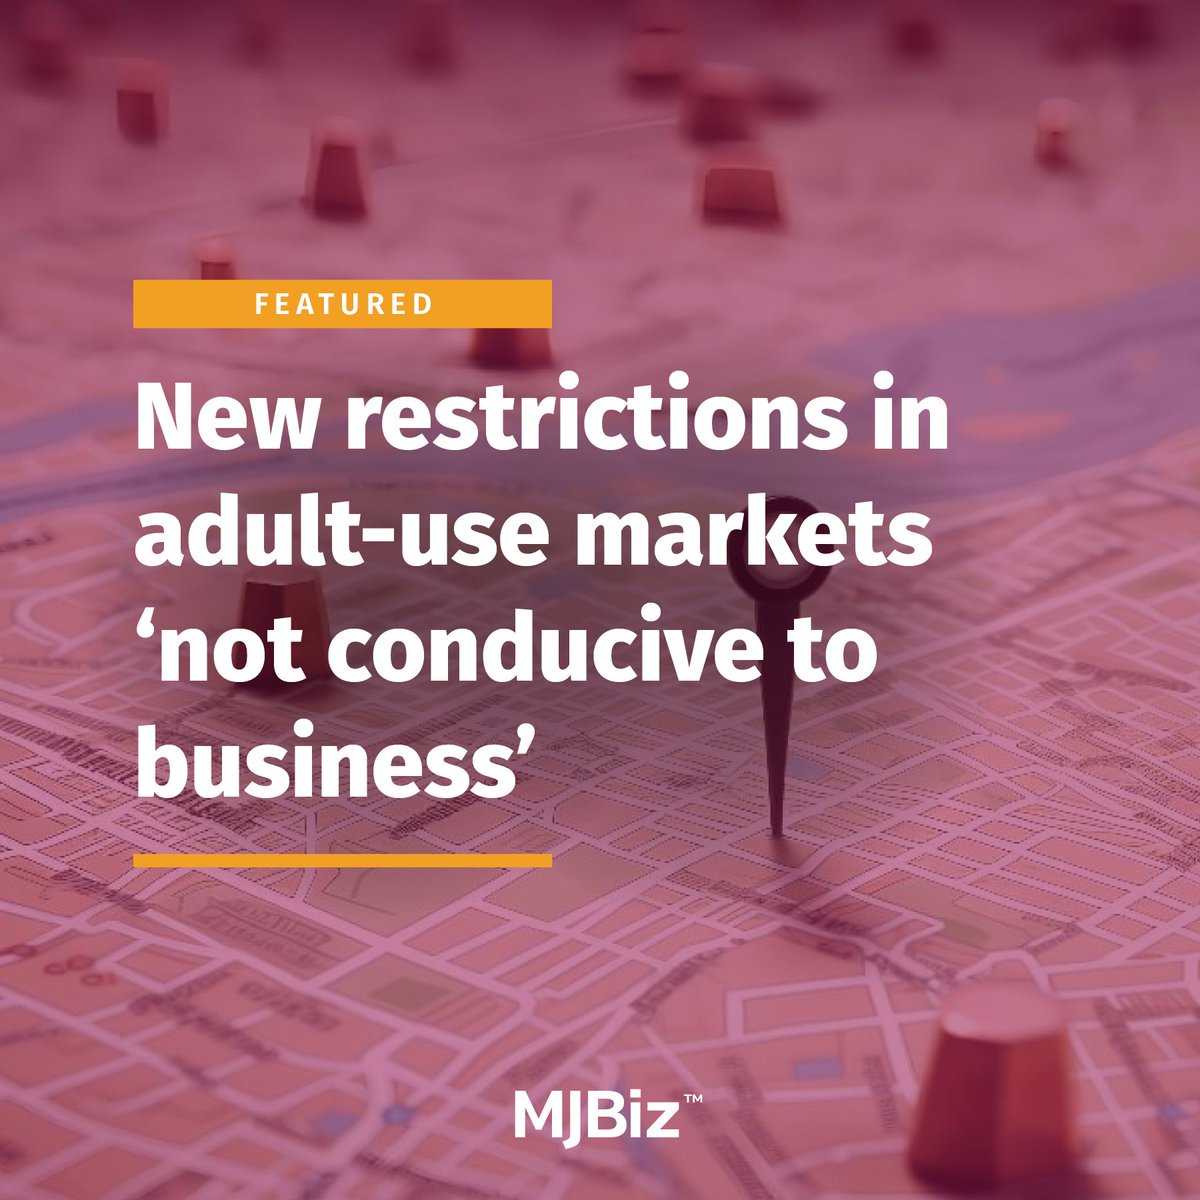 In some of the nation’s newest recreational markets, the shift has ushered in more onerous regulations and business restrictions, including outright product bans, lower potency caps and harsh limitations on packaging, product design and marketing. We've got the details:…